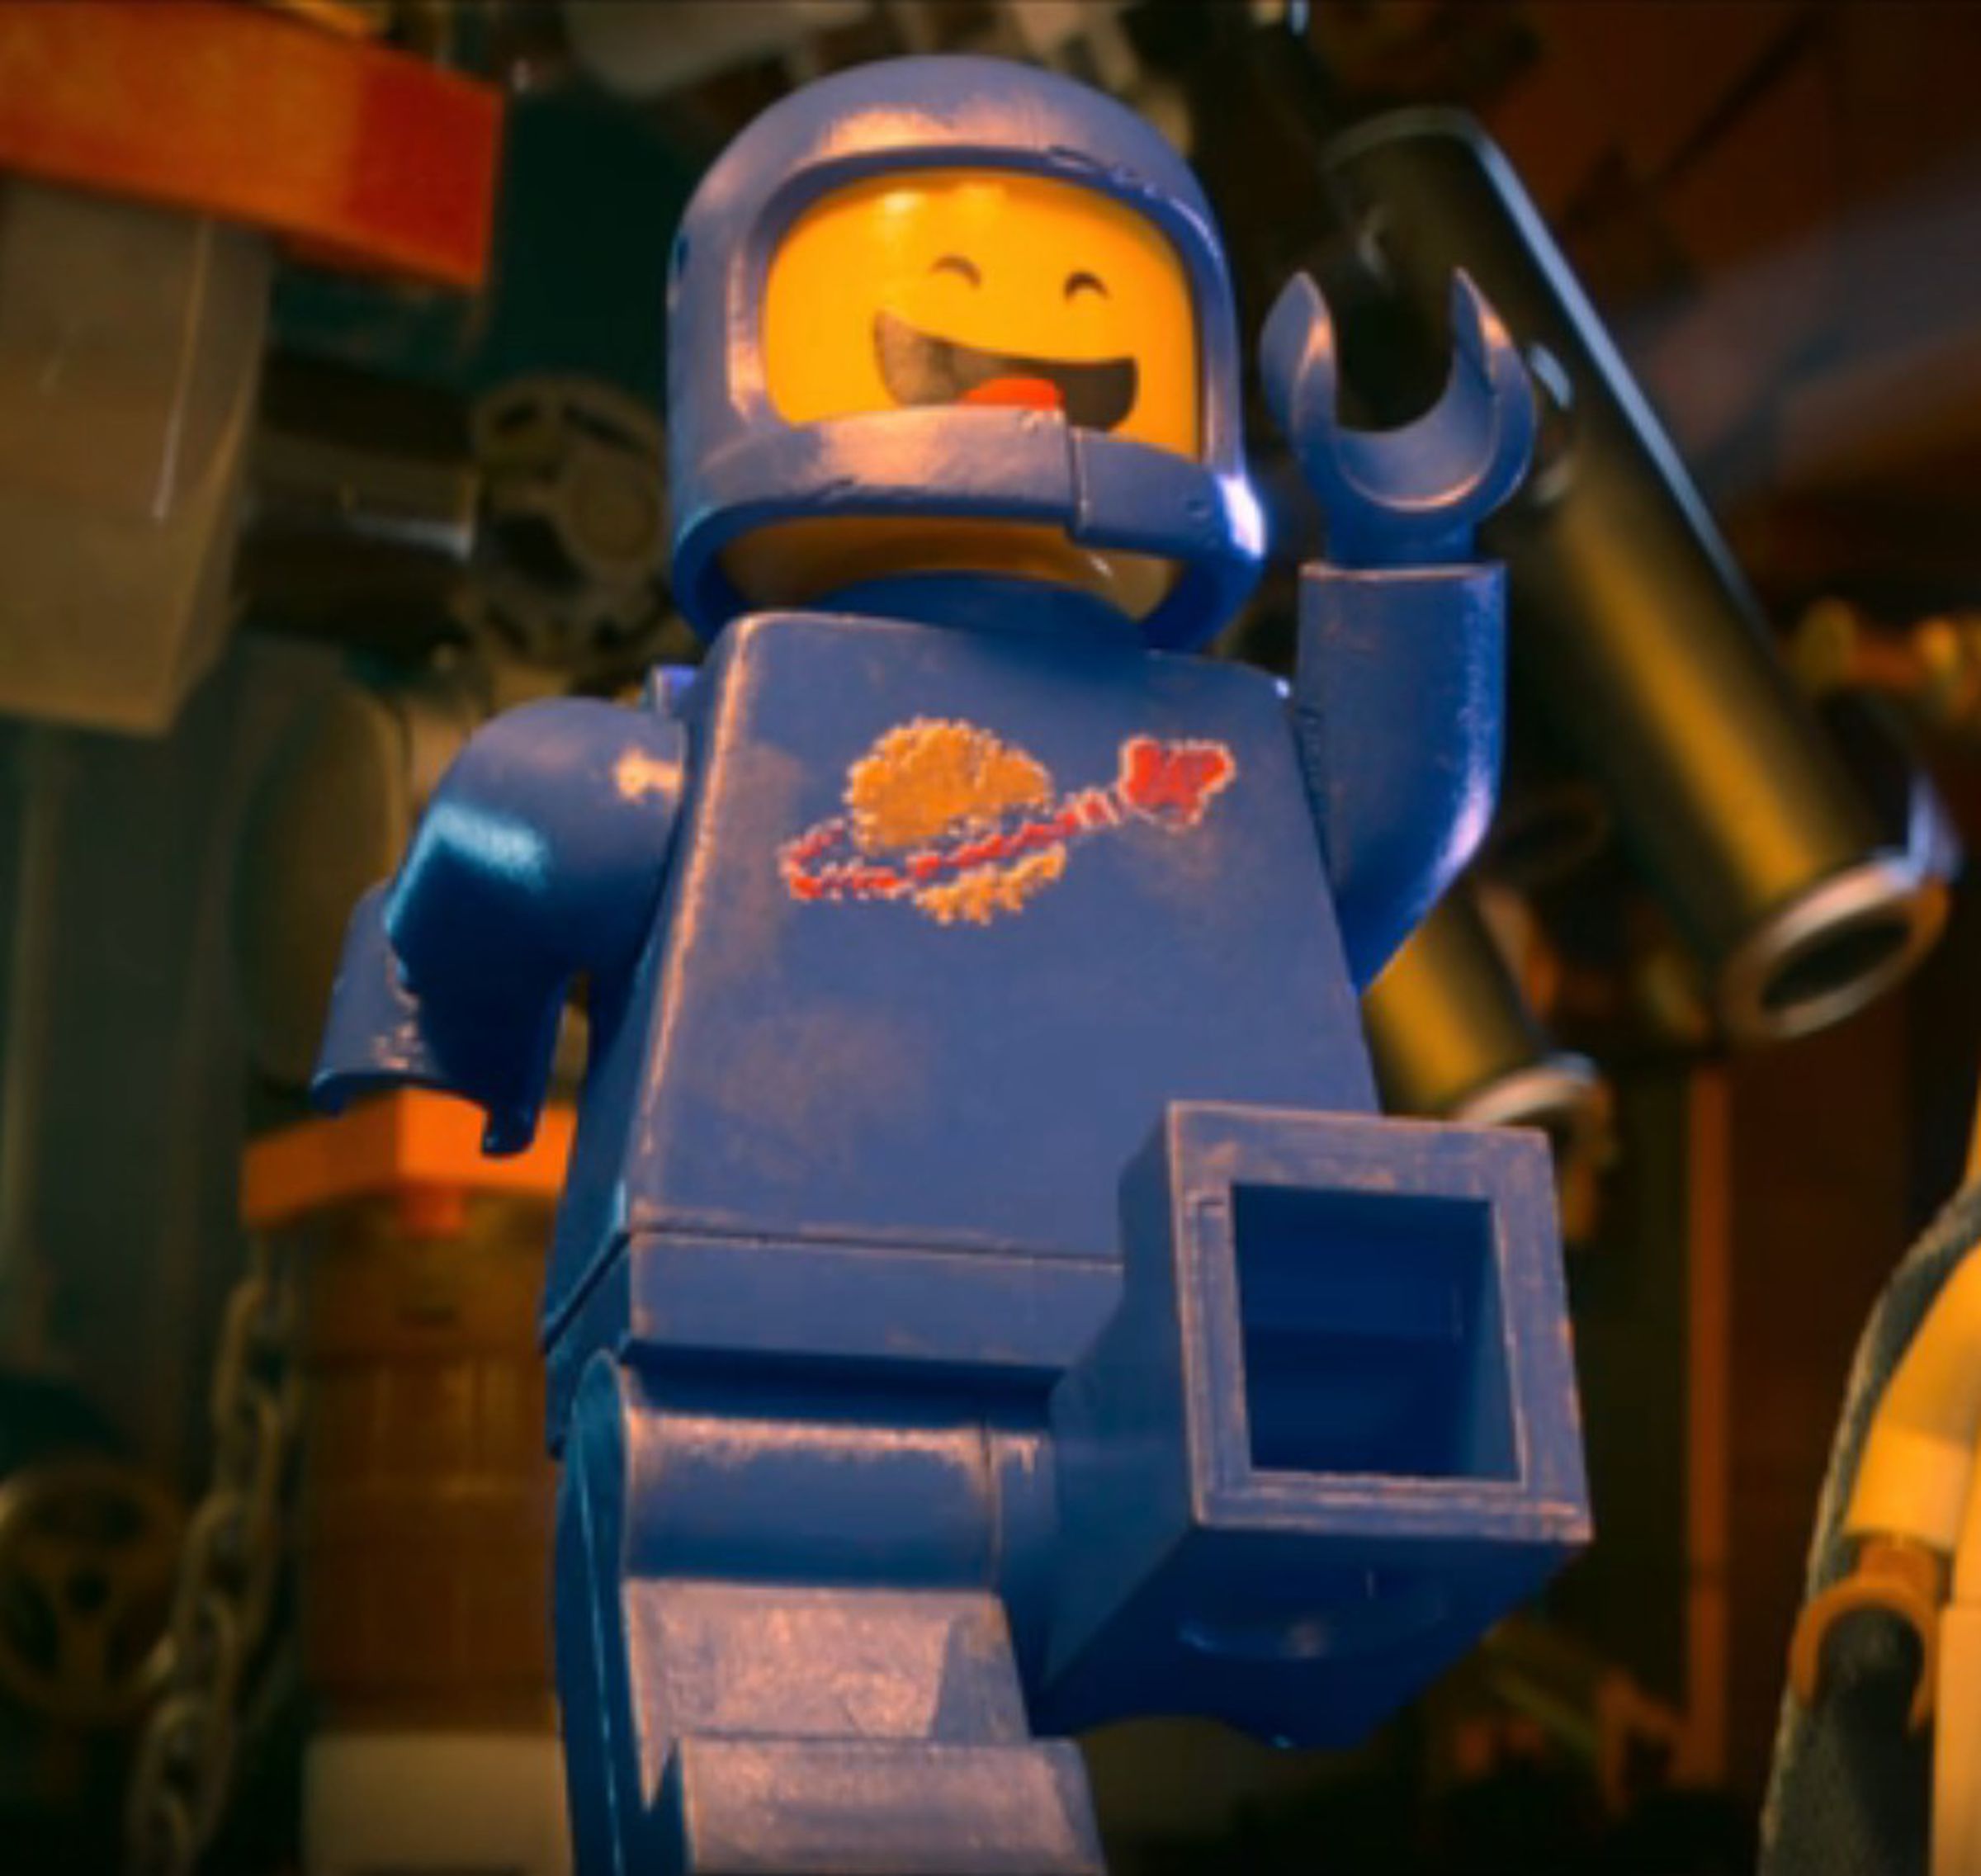 Benny, the astronaut from The Lego Movie, with his stereotypical broken helmet.